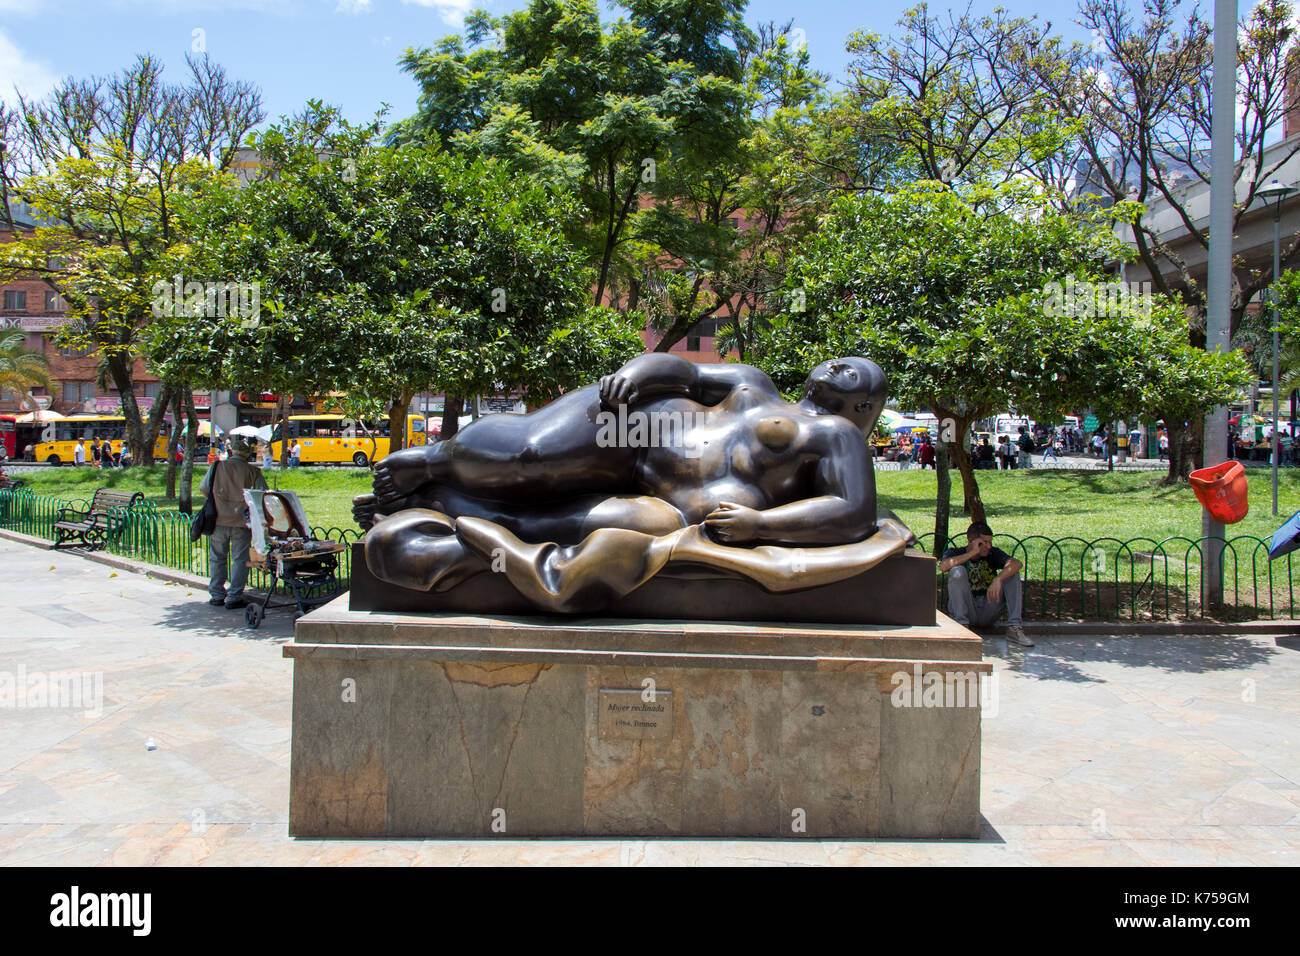 Mujer Reclinada sculpture, Botero Plaza, Medellin, Colombie Banque D'Images